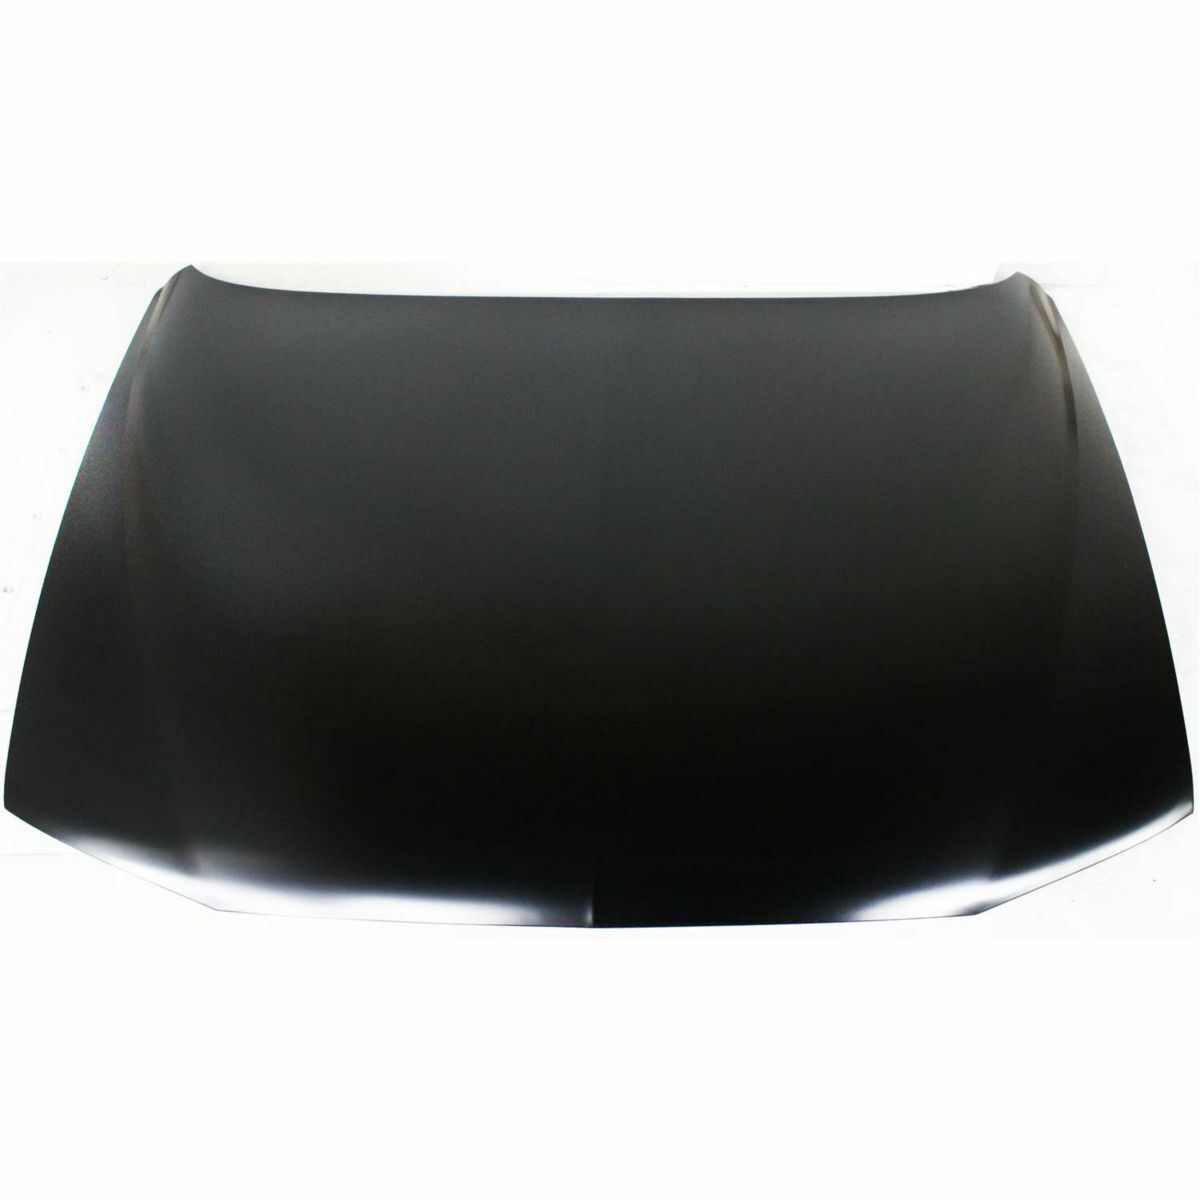 1997-2005 BUICK CENTURY Hood Painted to Match